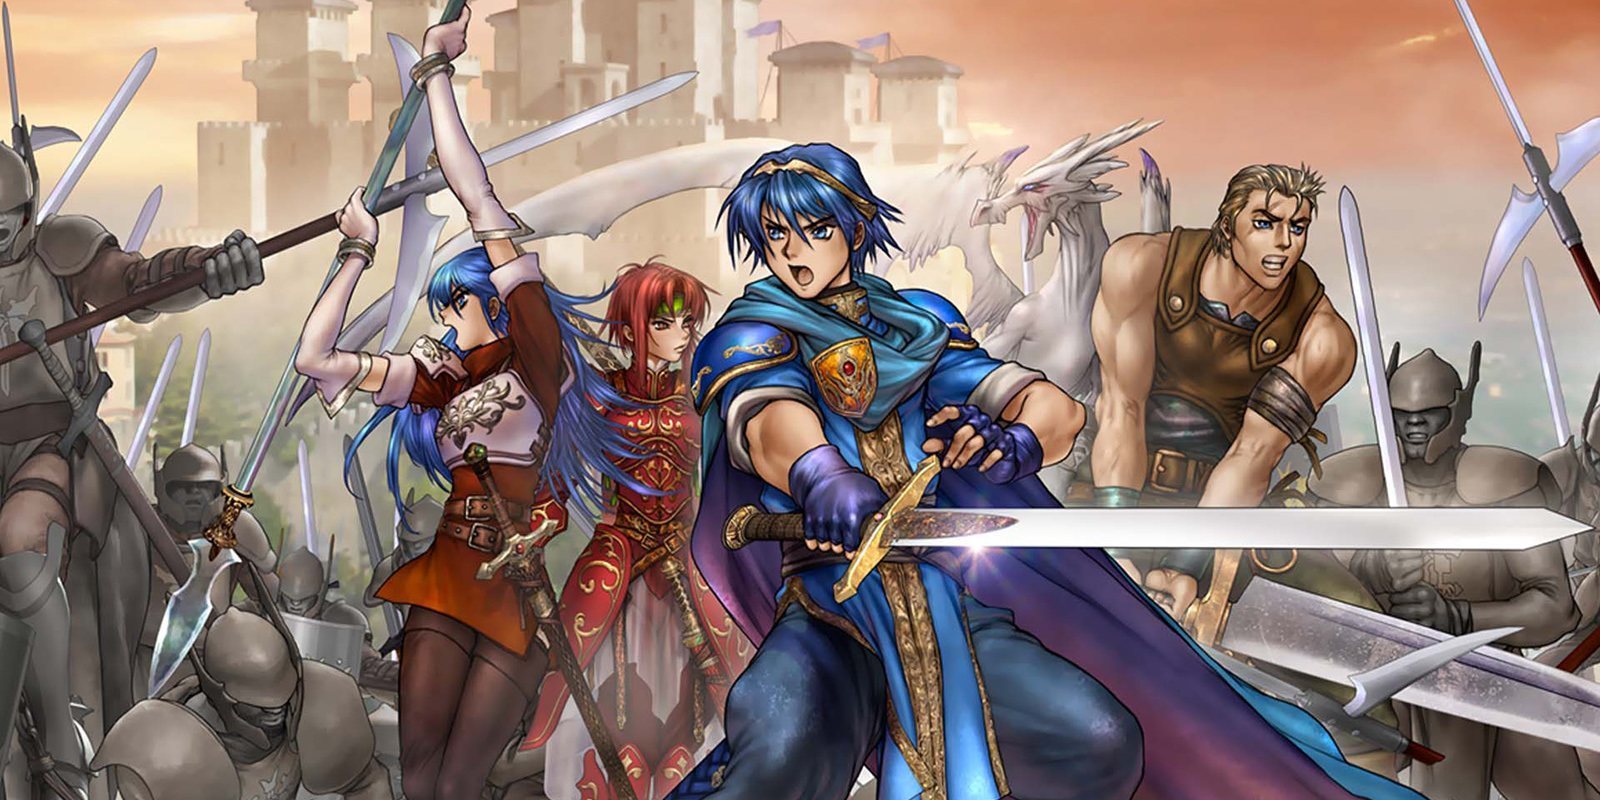 Marth volverá con 'Fire Emblem: Shadow Dragon and the Blade of Light' a Nintendo Switch